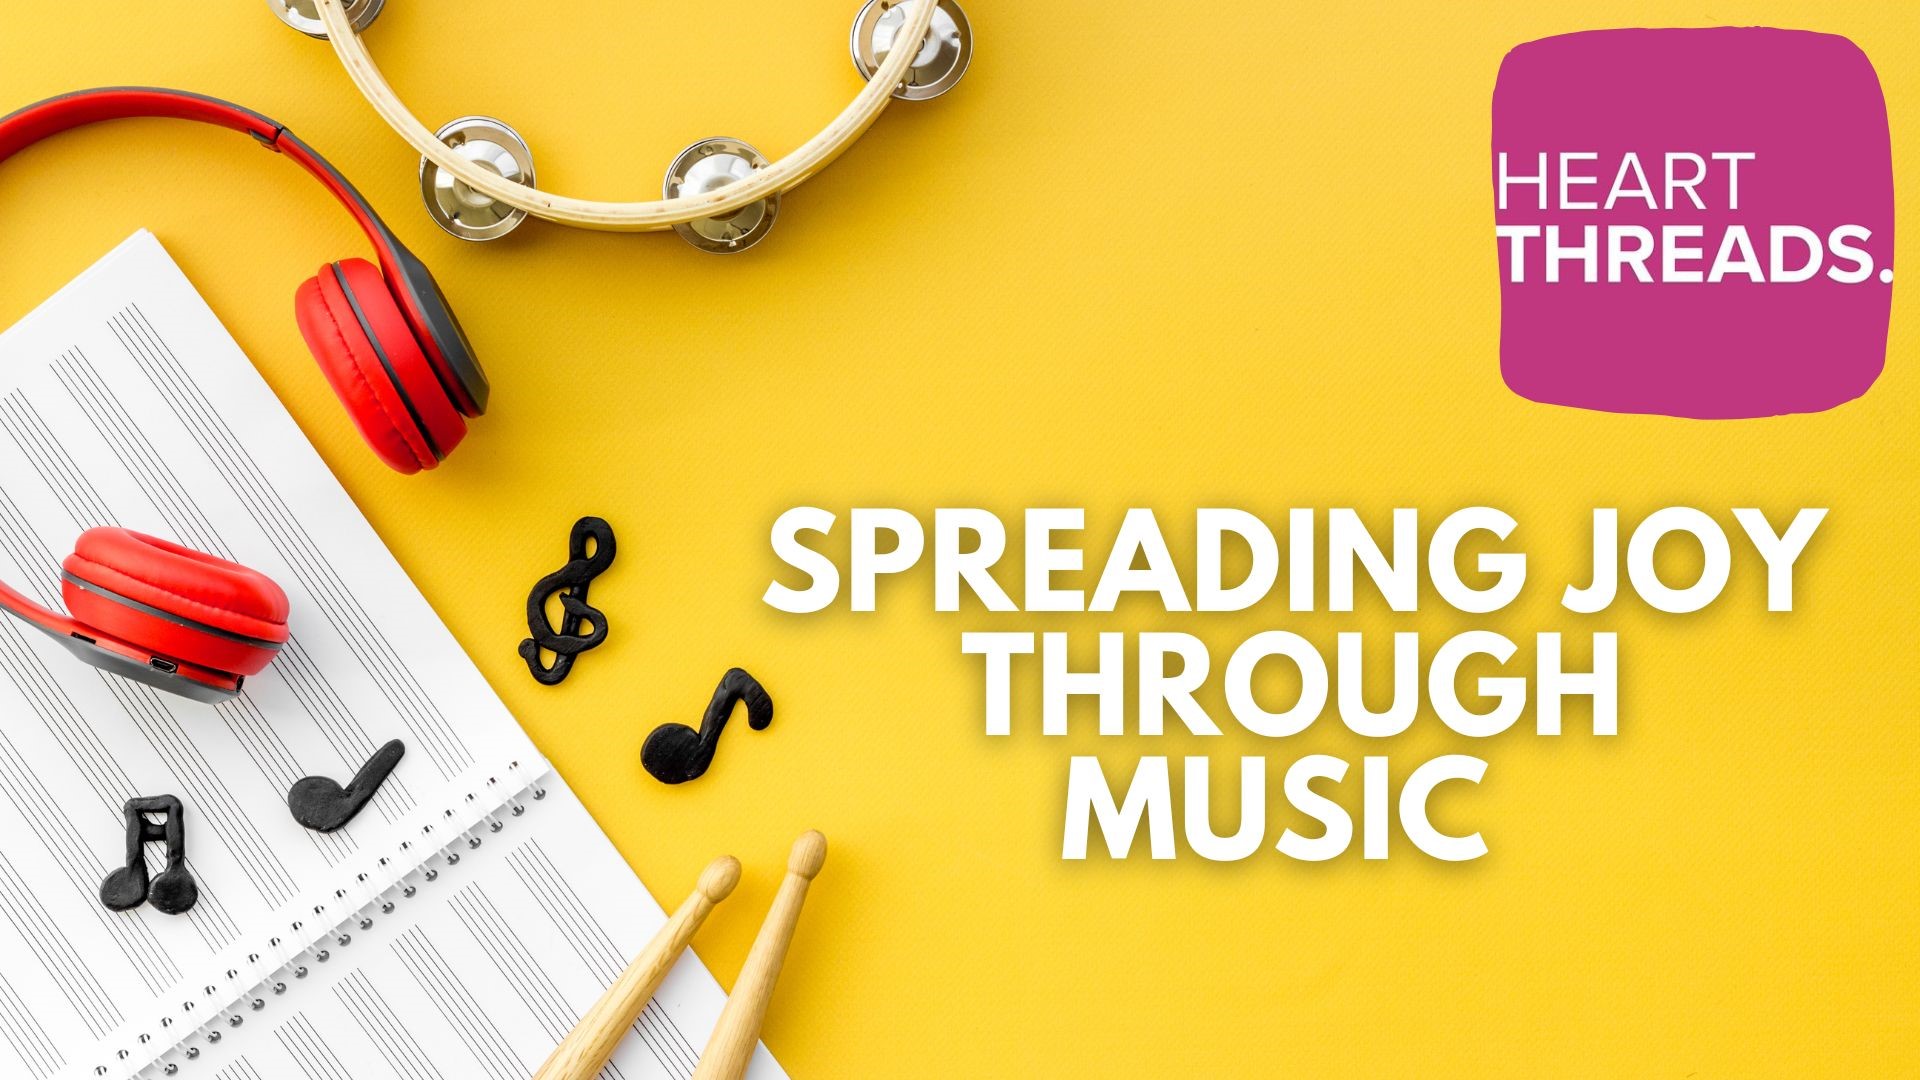 Music not only spreads joy to those who hear it, but also brings people together. Here are heartwarming stories of the power of music to create happiness and more.